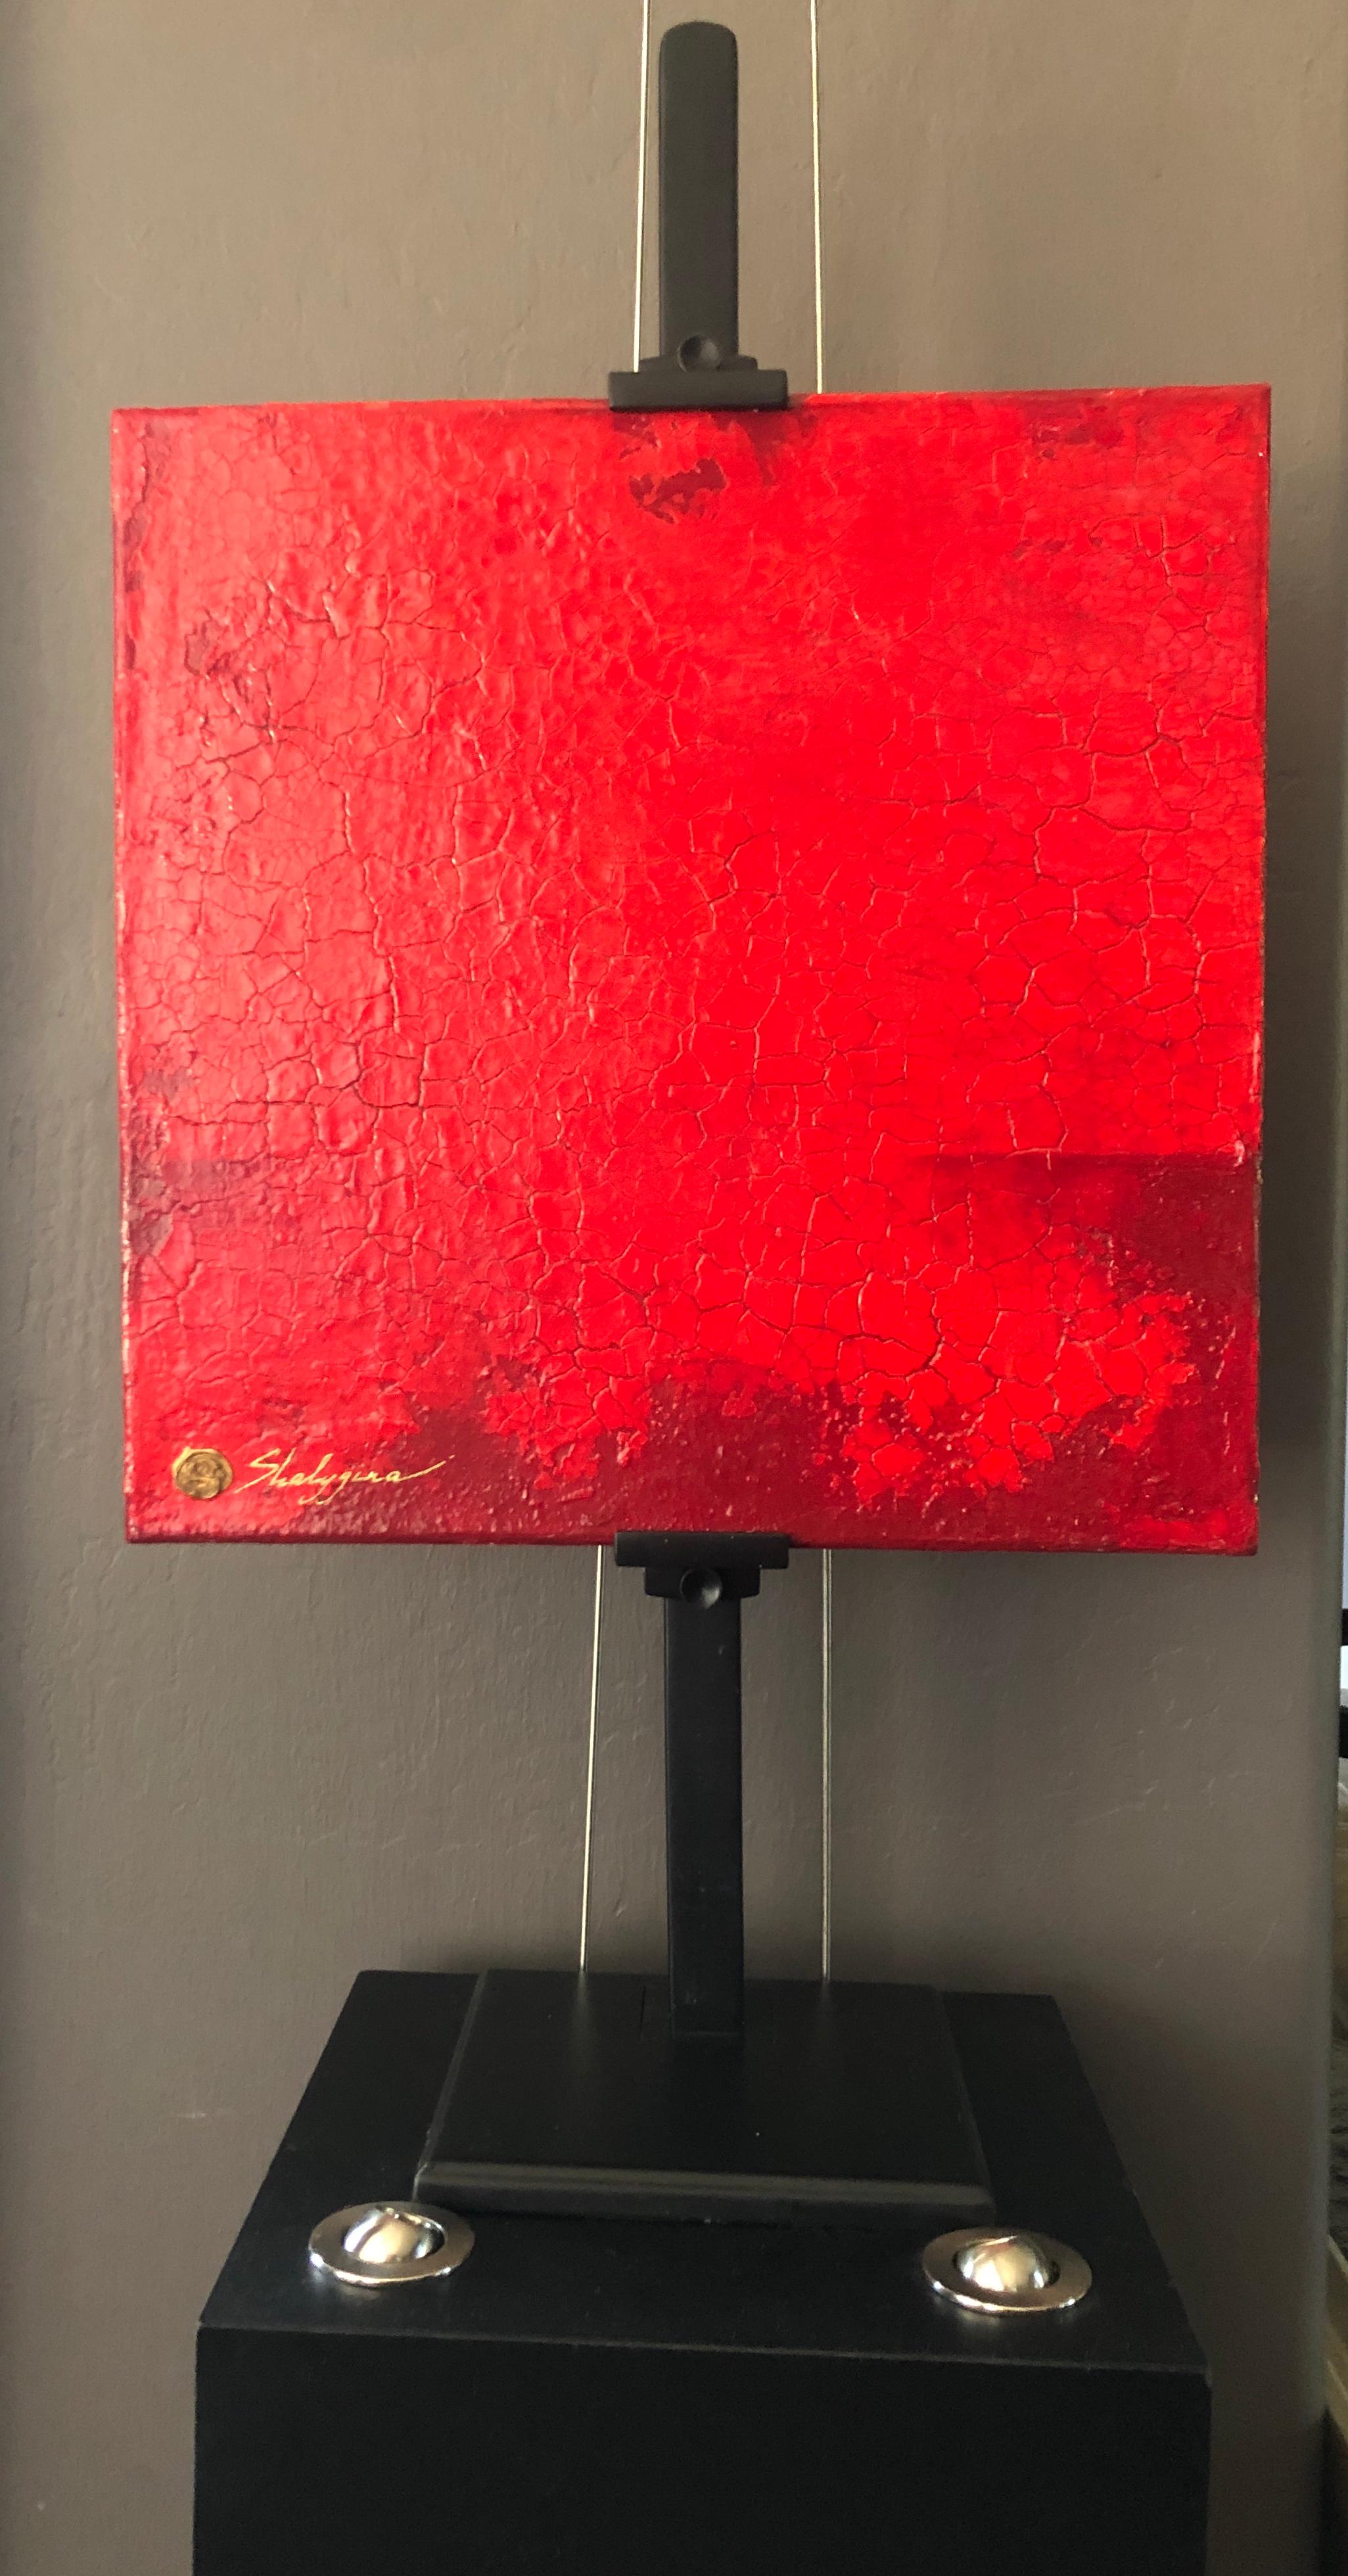 monochromatic painting red